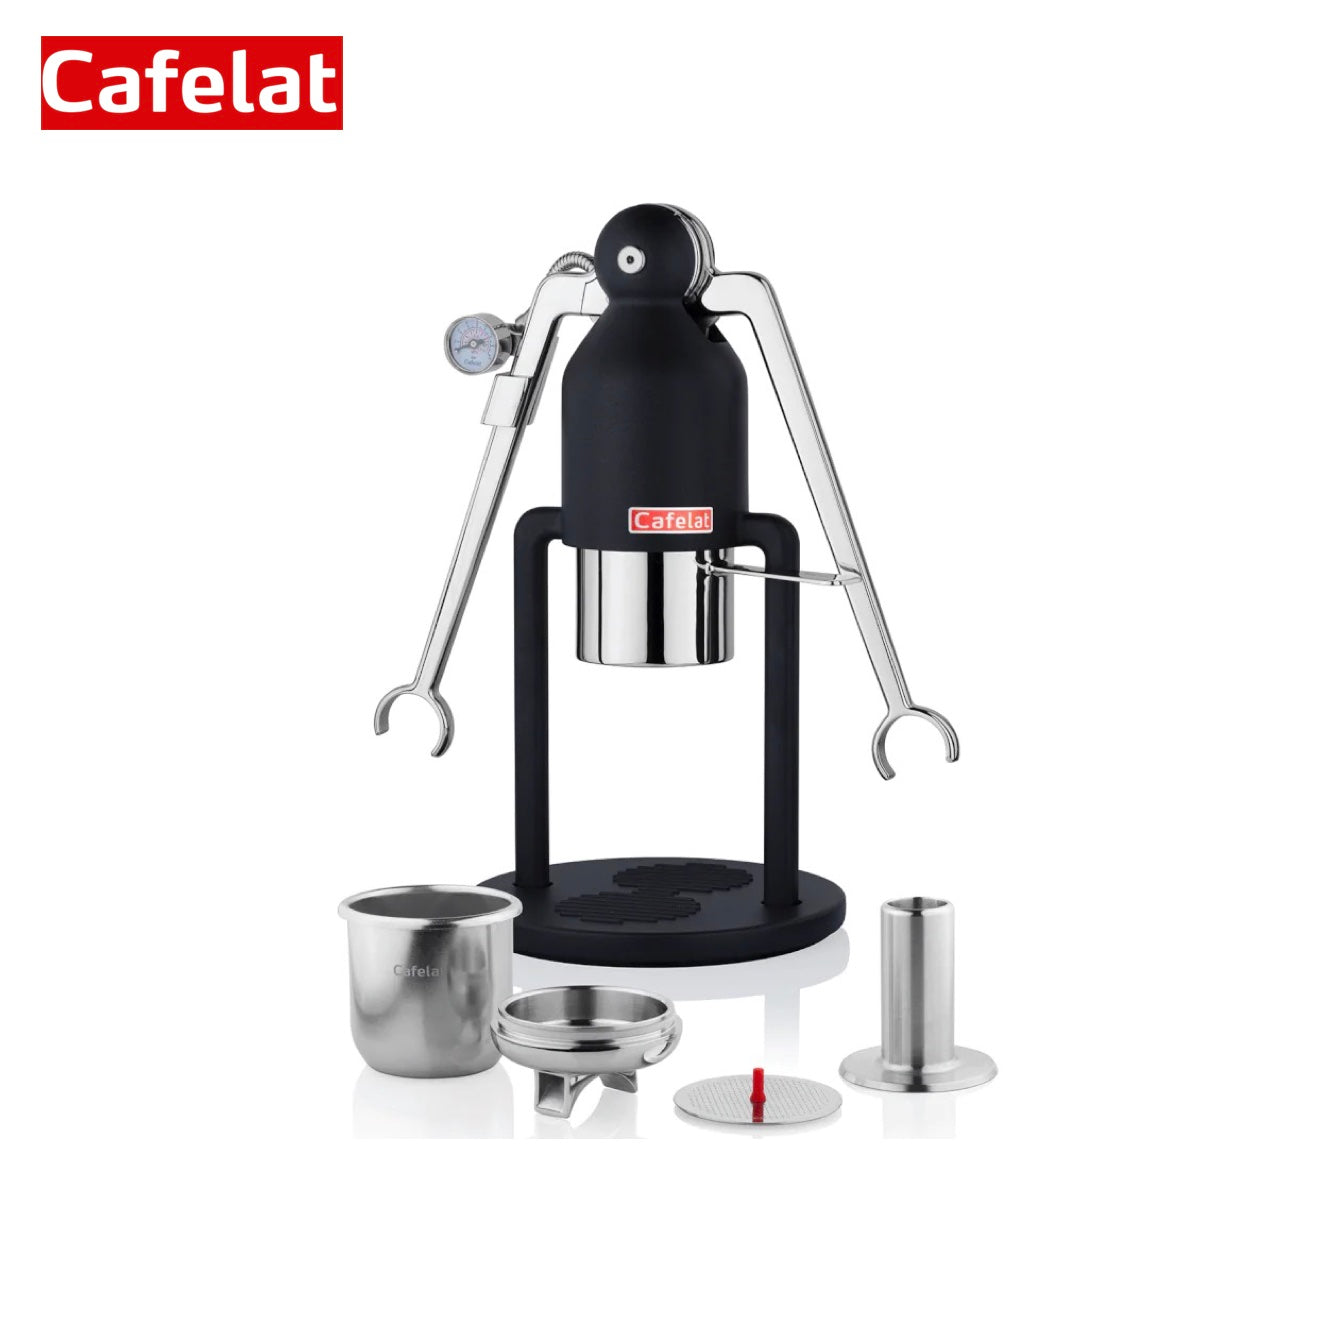 Cafelat Robot Espresso Maker (with pressure gauge) – The Brew Therapy